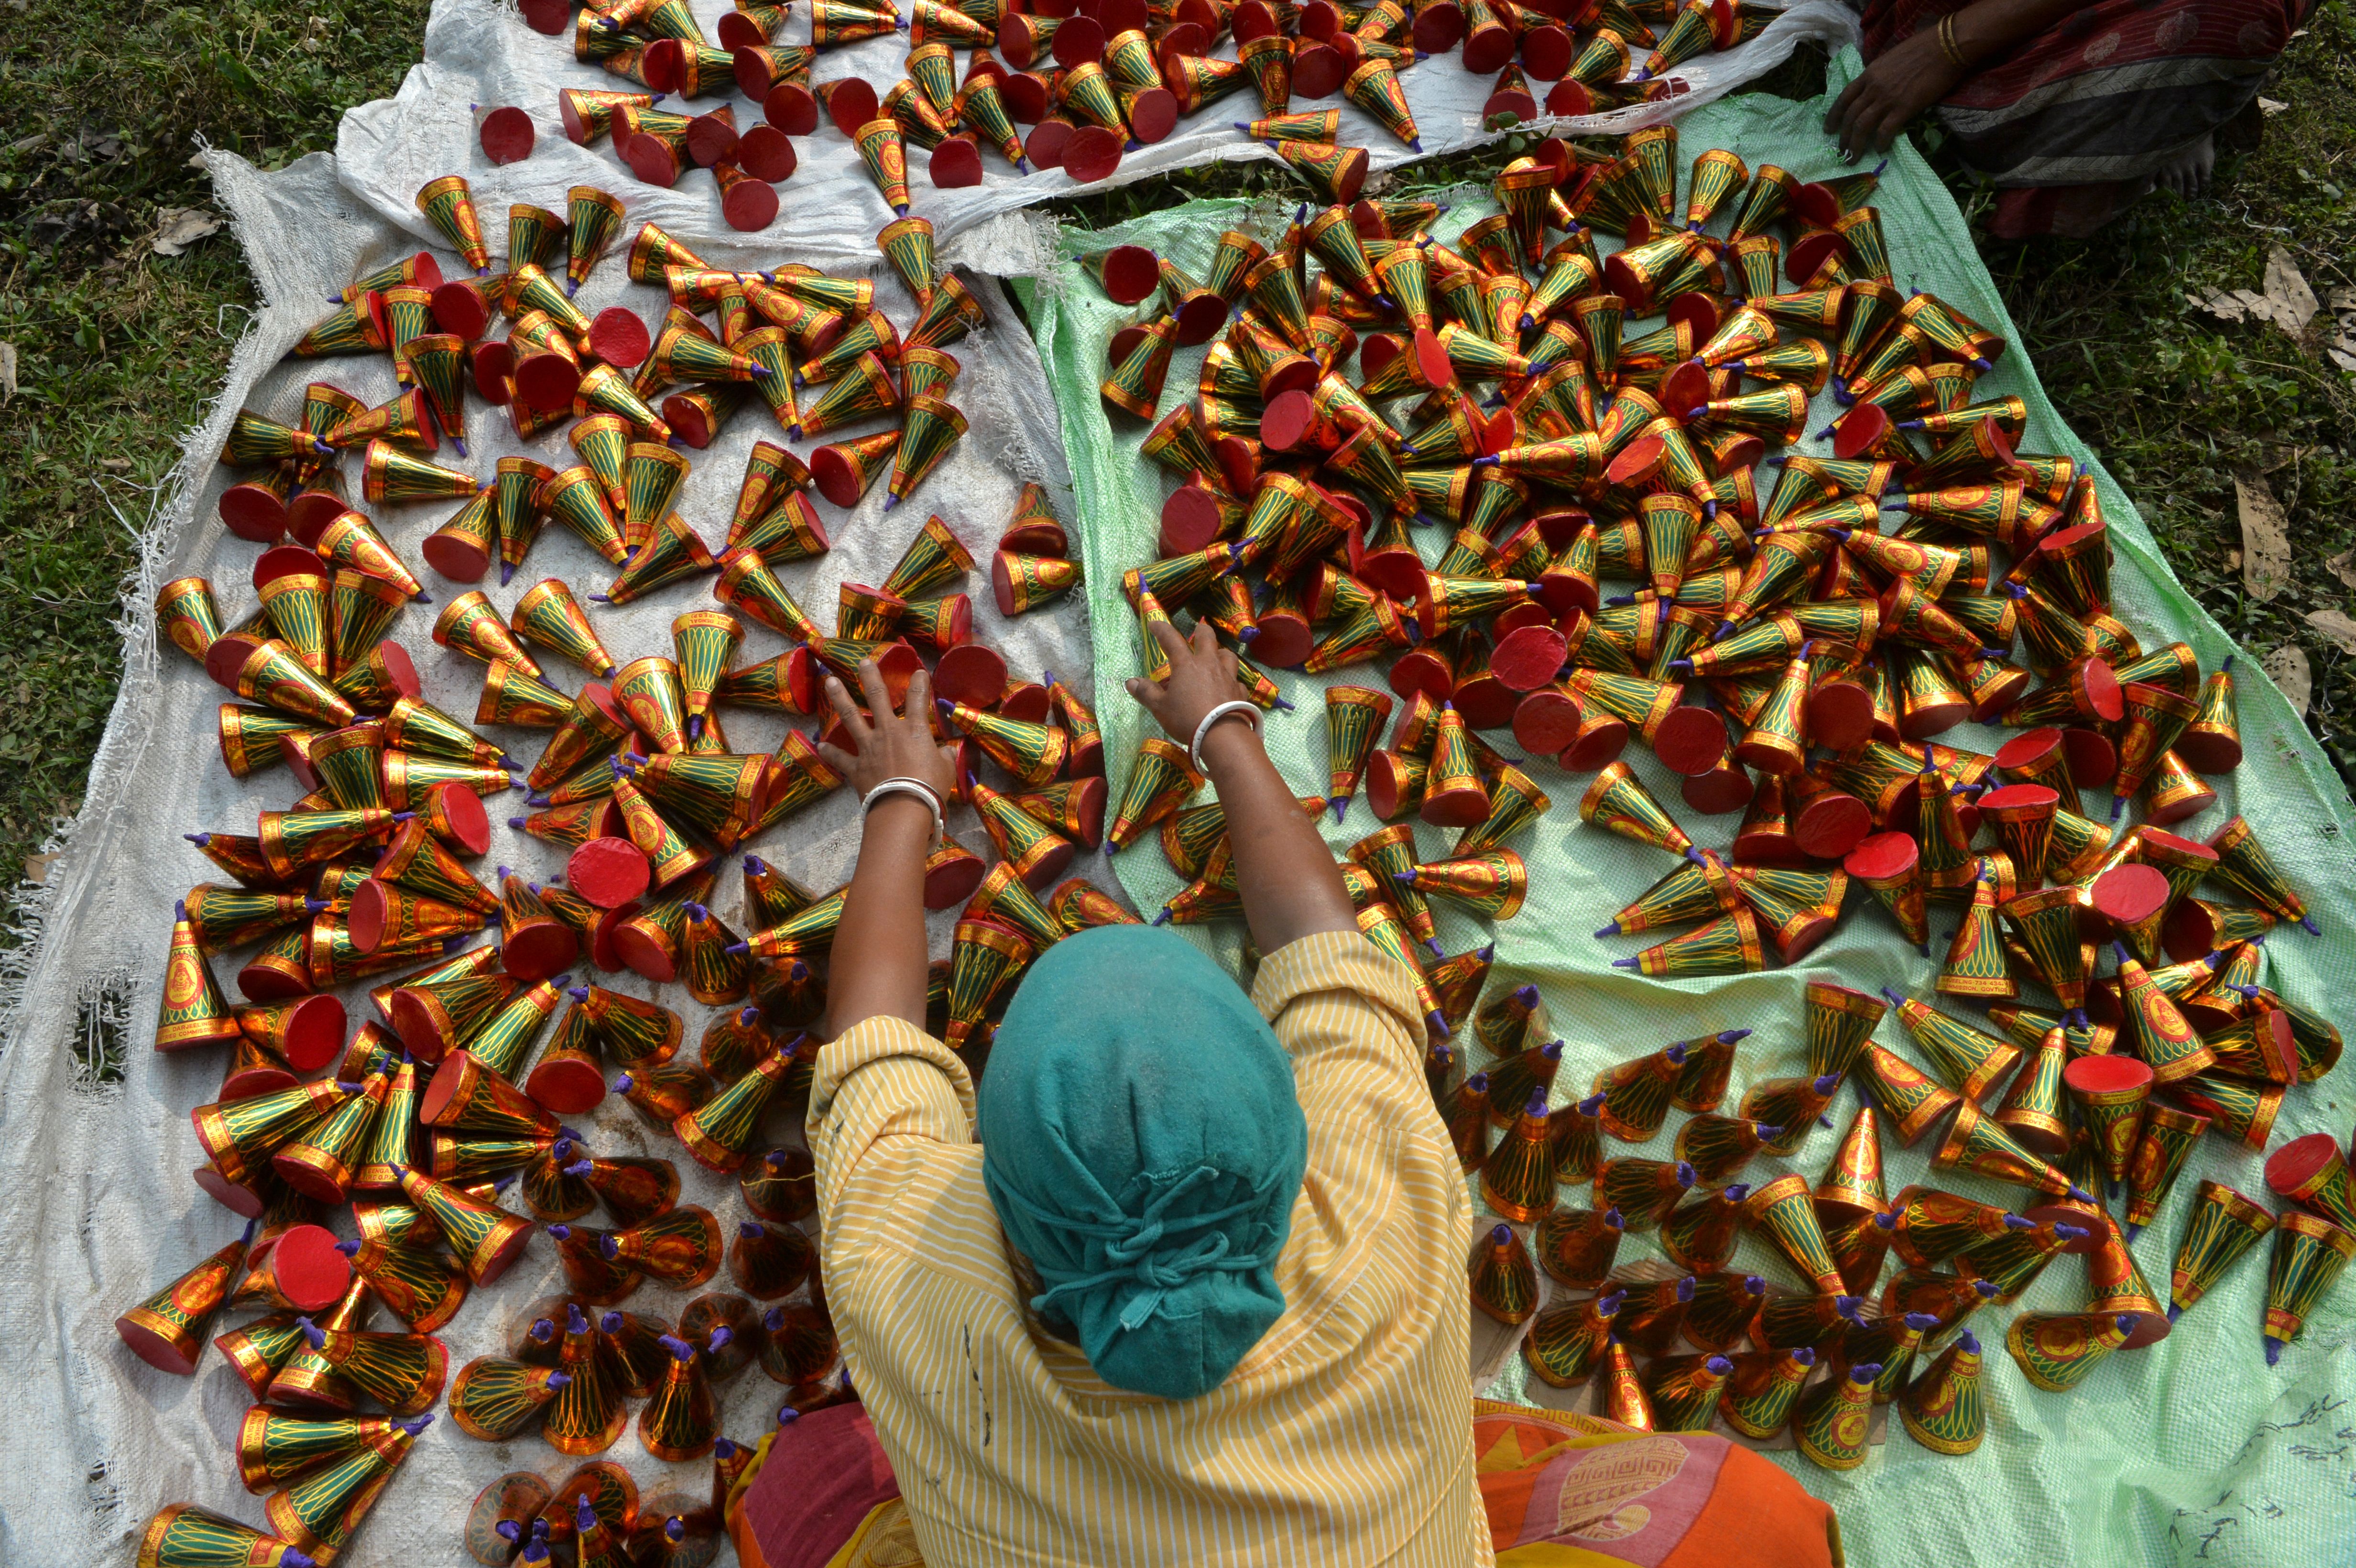 File A labourer works on eco-friendly crackers, which produce less smoke and contain less chemicals, at Raj firecracker factory in Liusipukuri village, on the outskirts of Siliguri in 2019